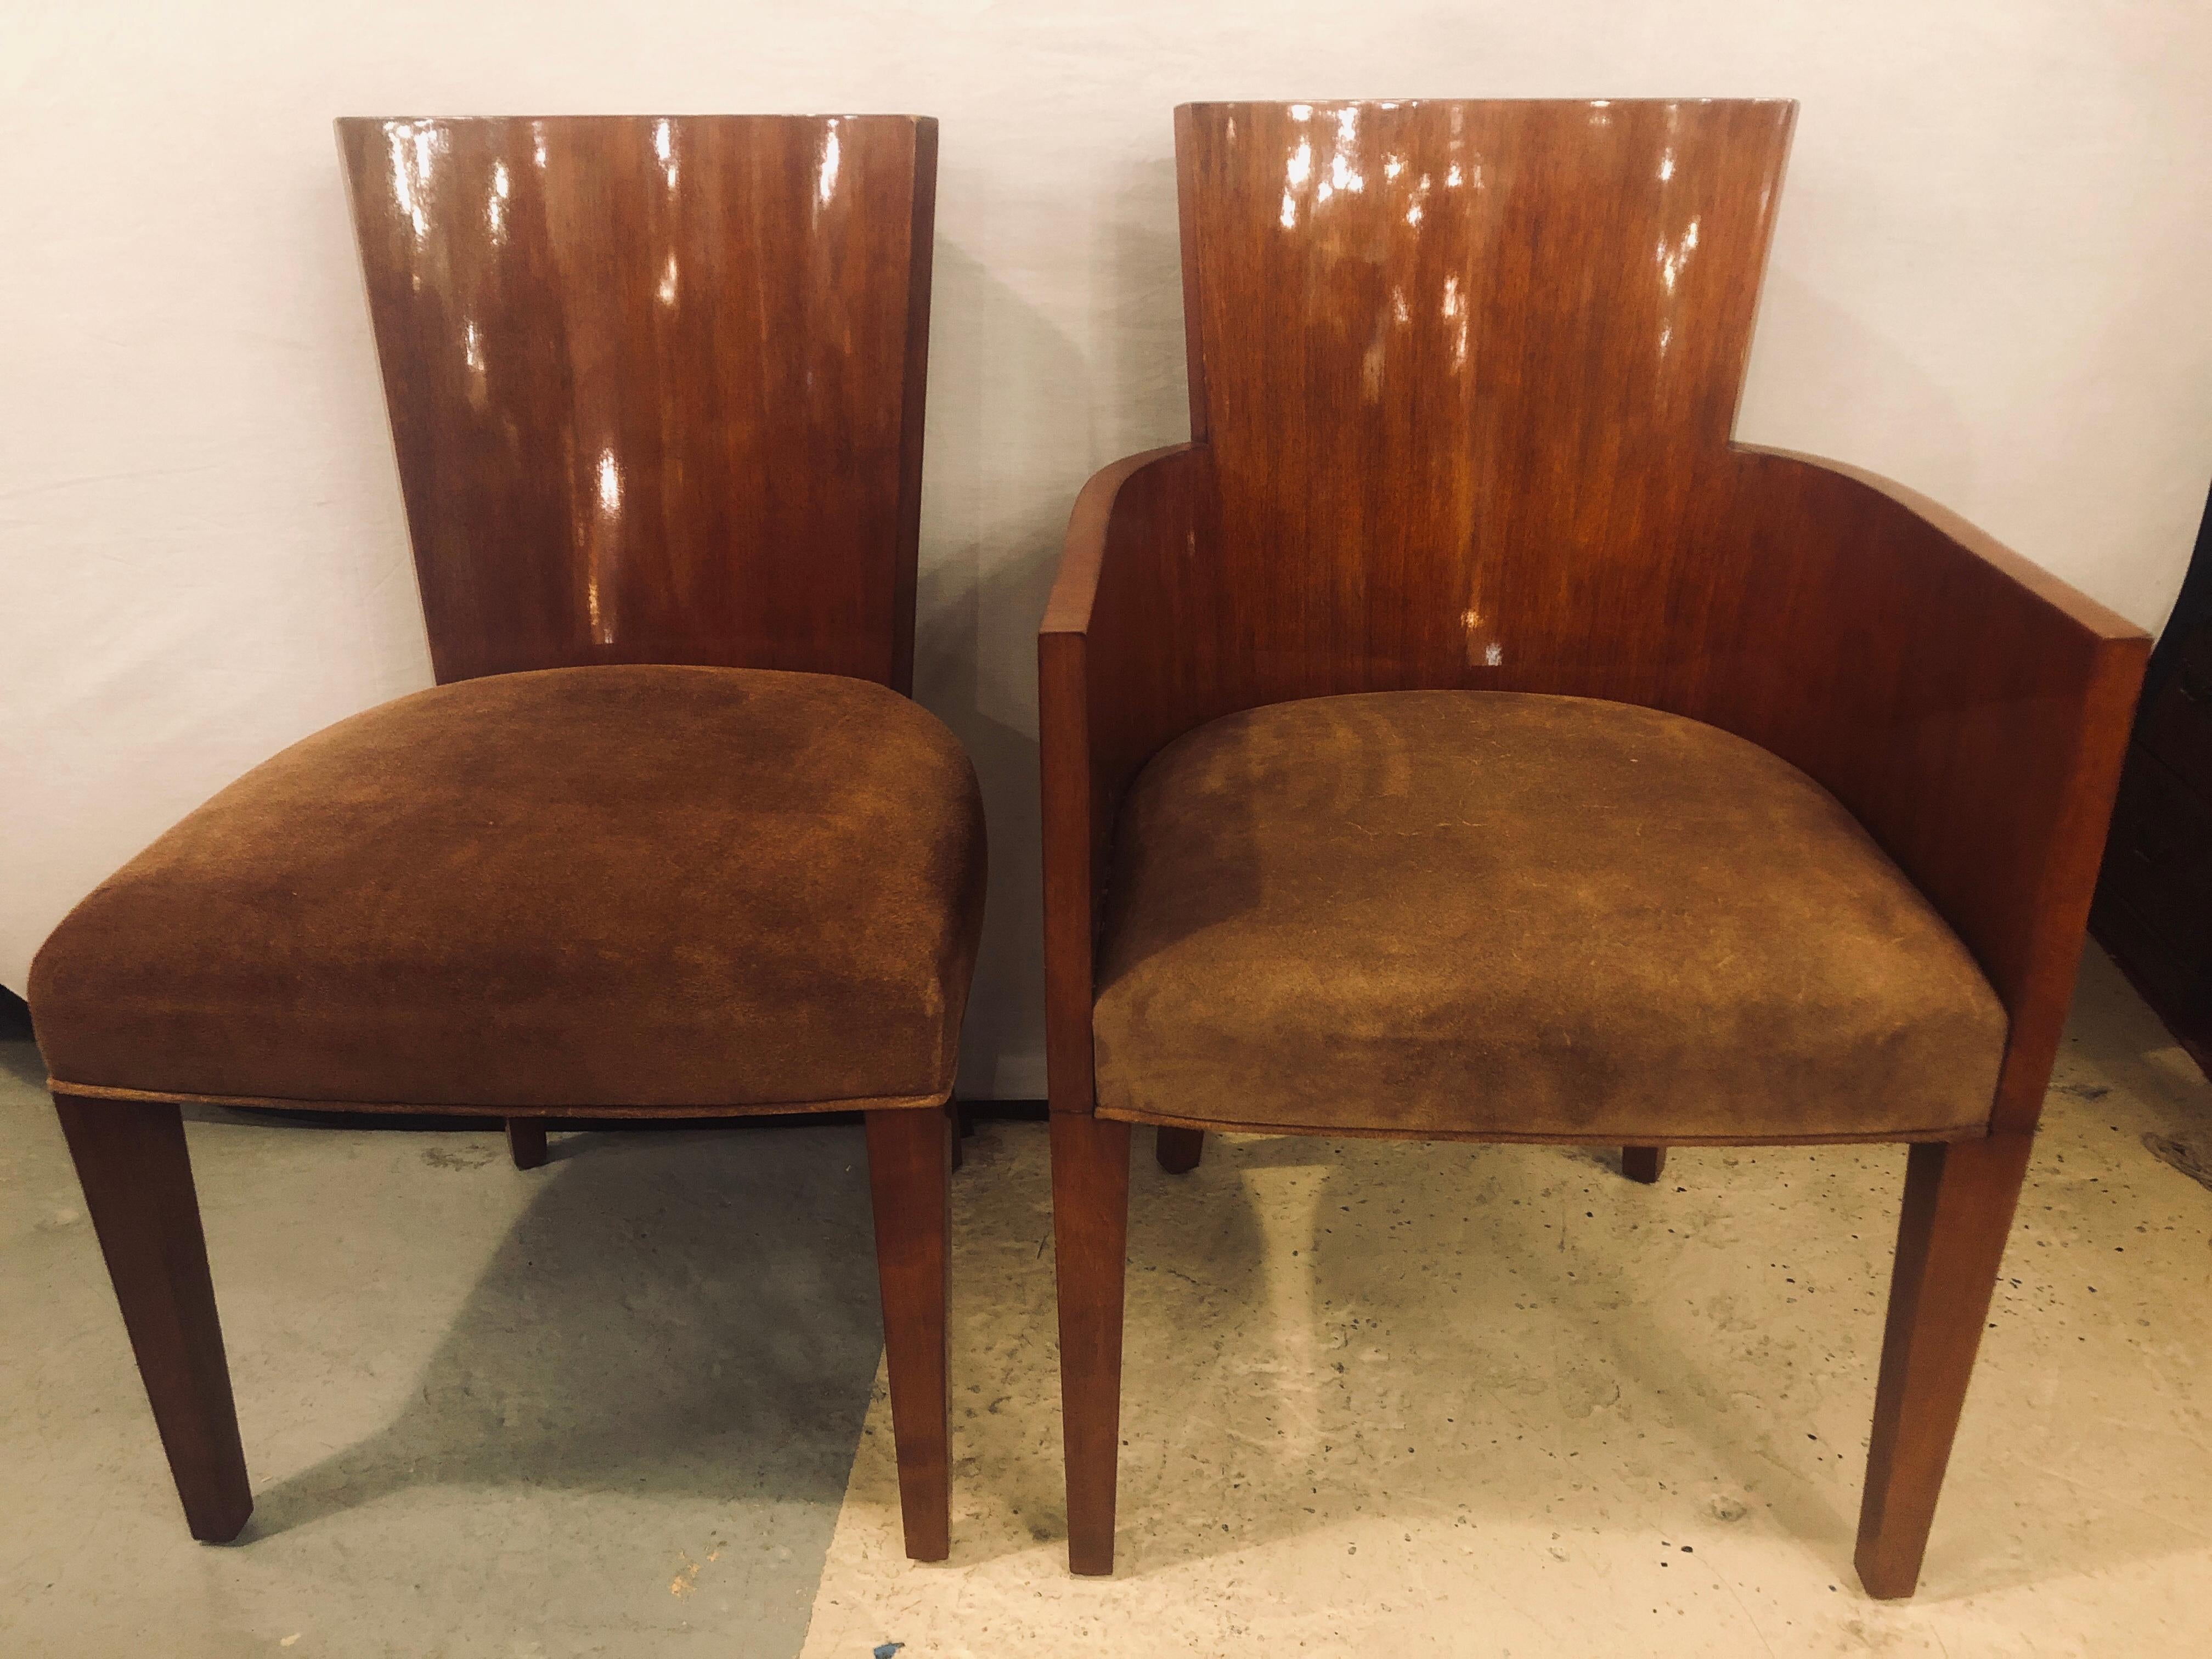 Set of eight mahogany Ralph Lauren dining chairs from the Modern Hollywood collection with suede seats 6 side 2 arm. The measurements listed are for the side chairs. The armchairs measure 34.75 inches height, 22 inches width, 22.5 inches depth.